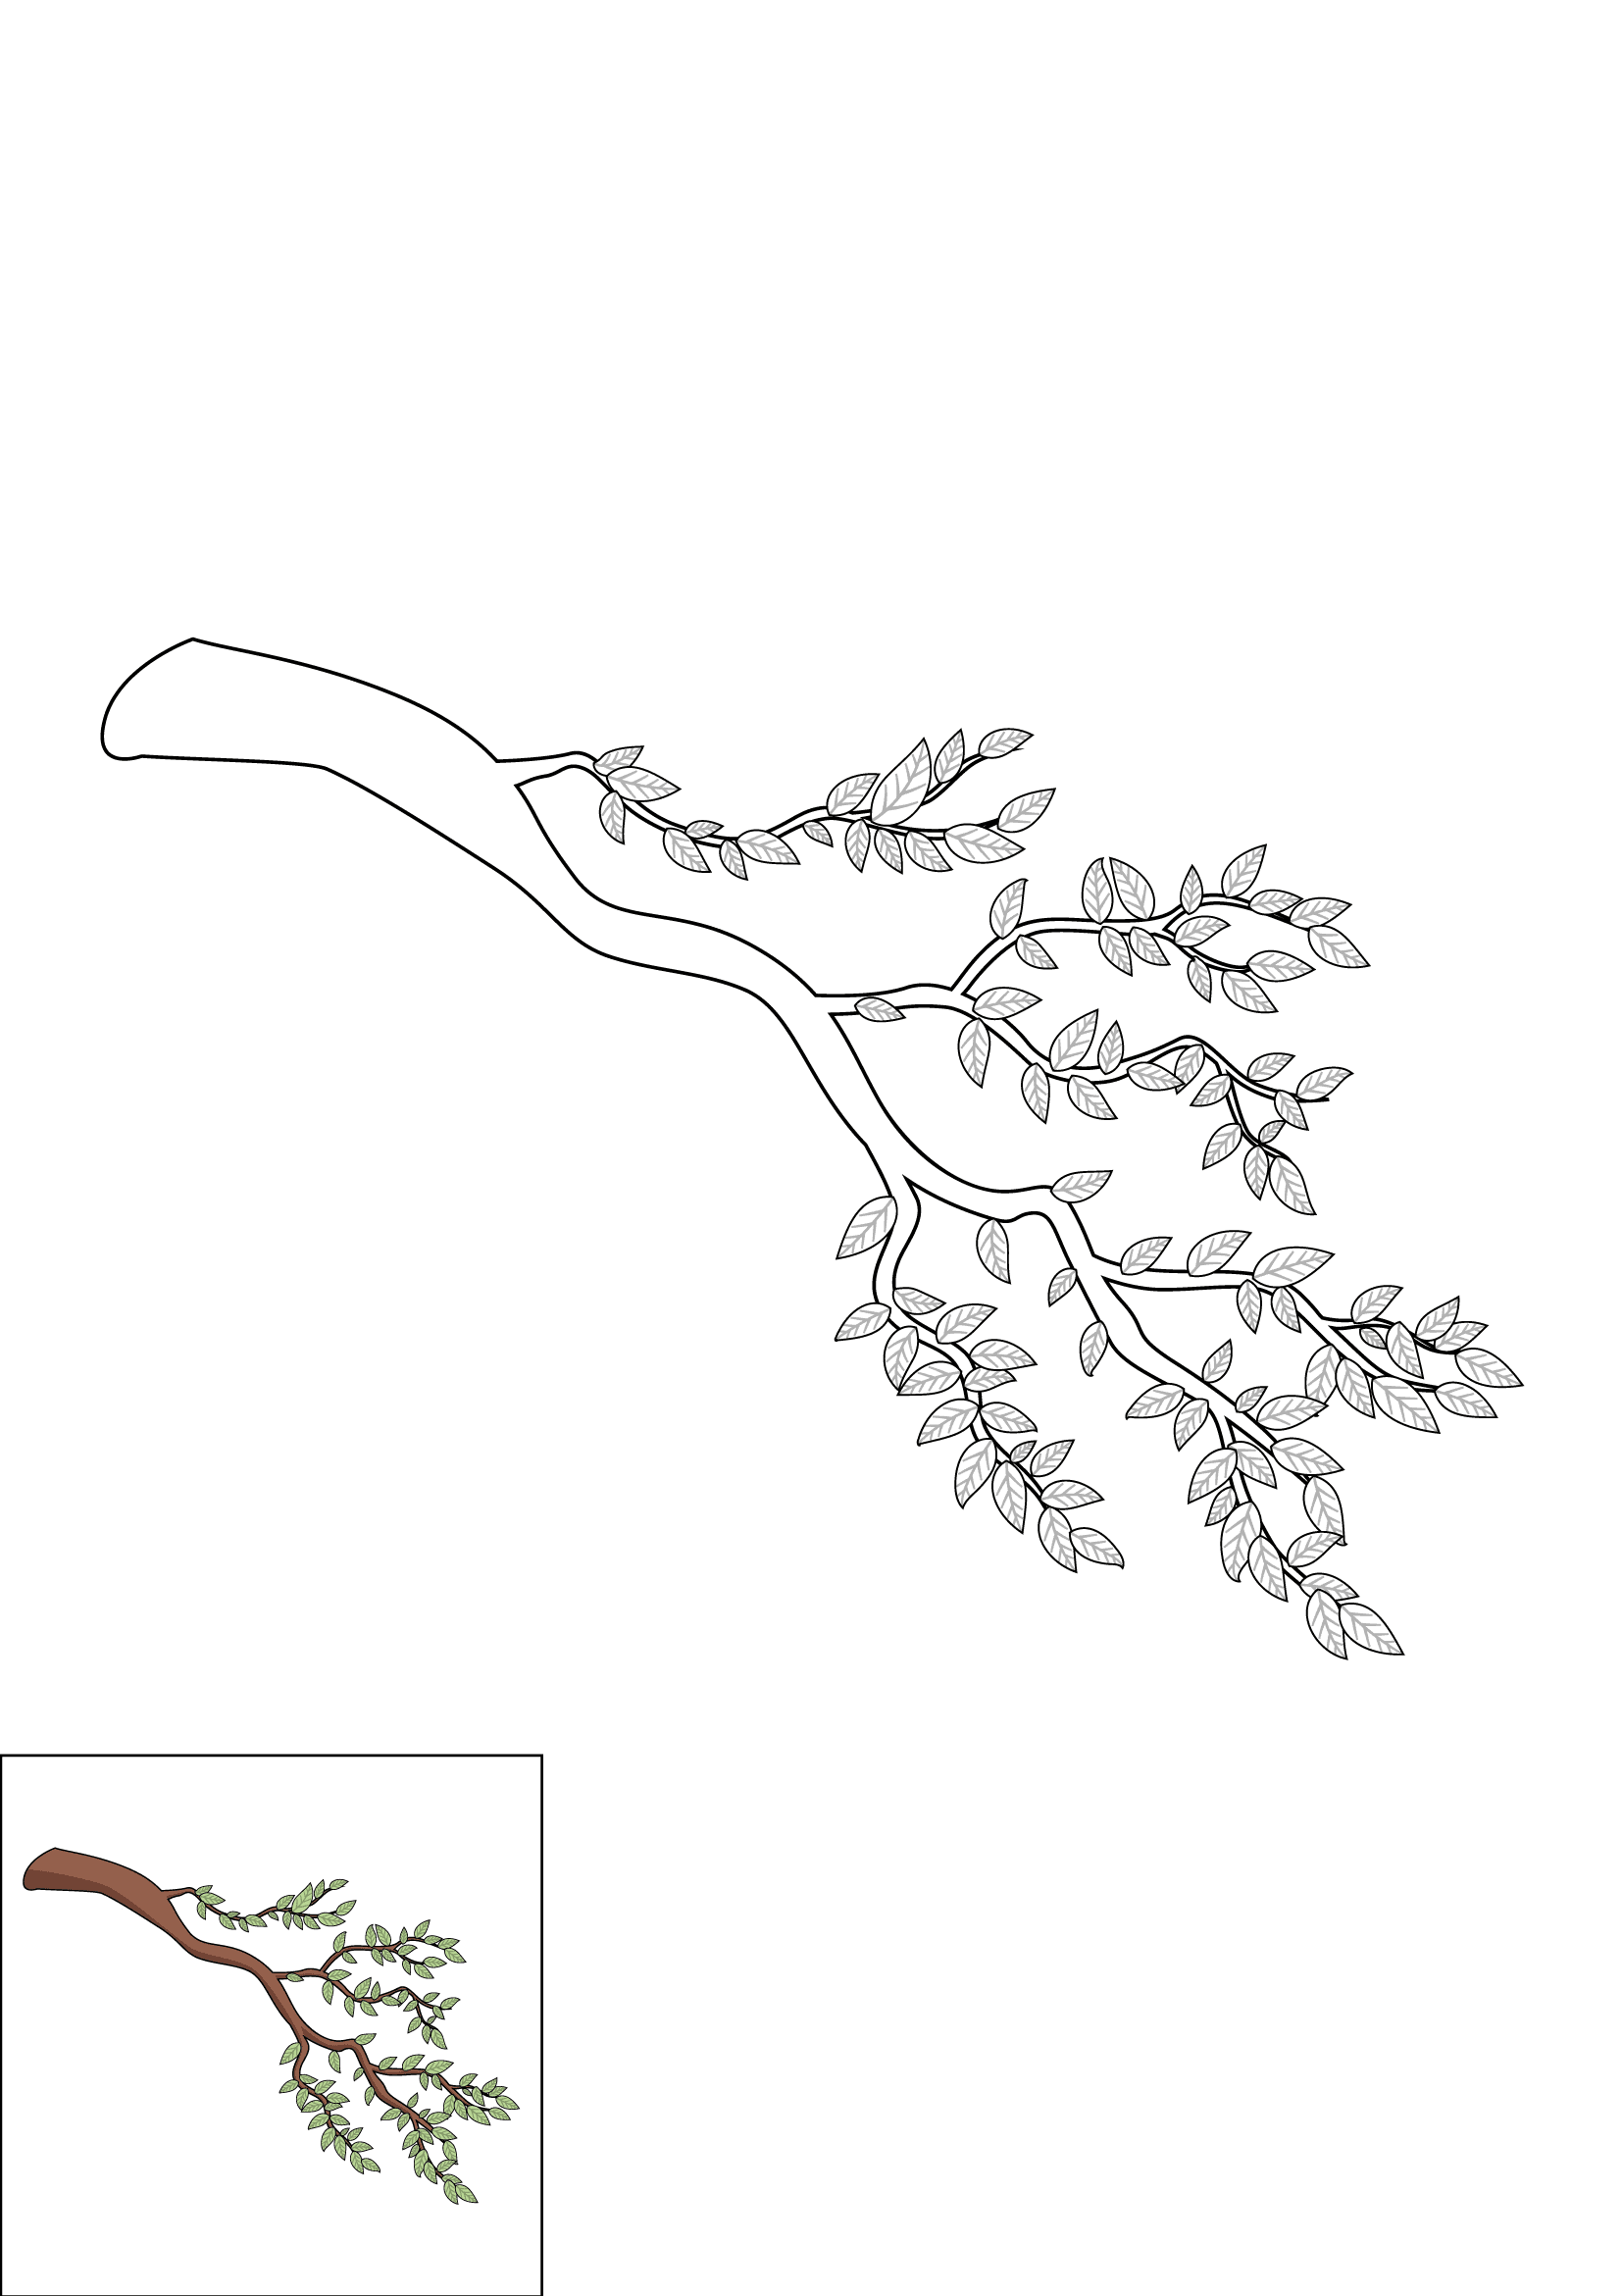 How to Draw A Tree Branch Step by Step Printable Color